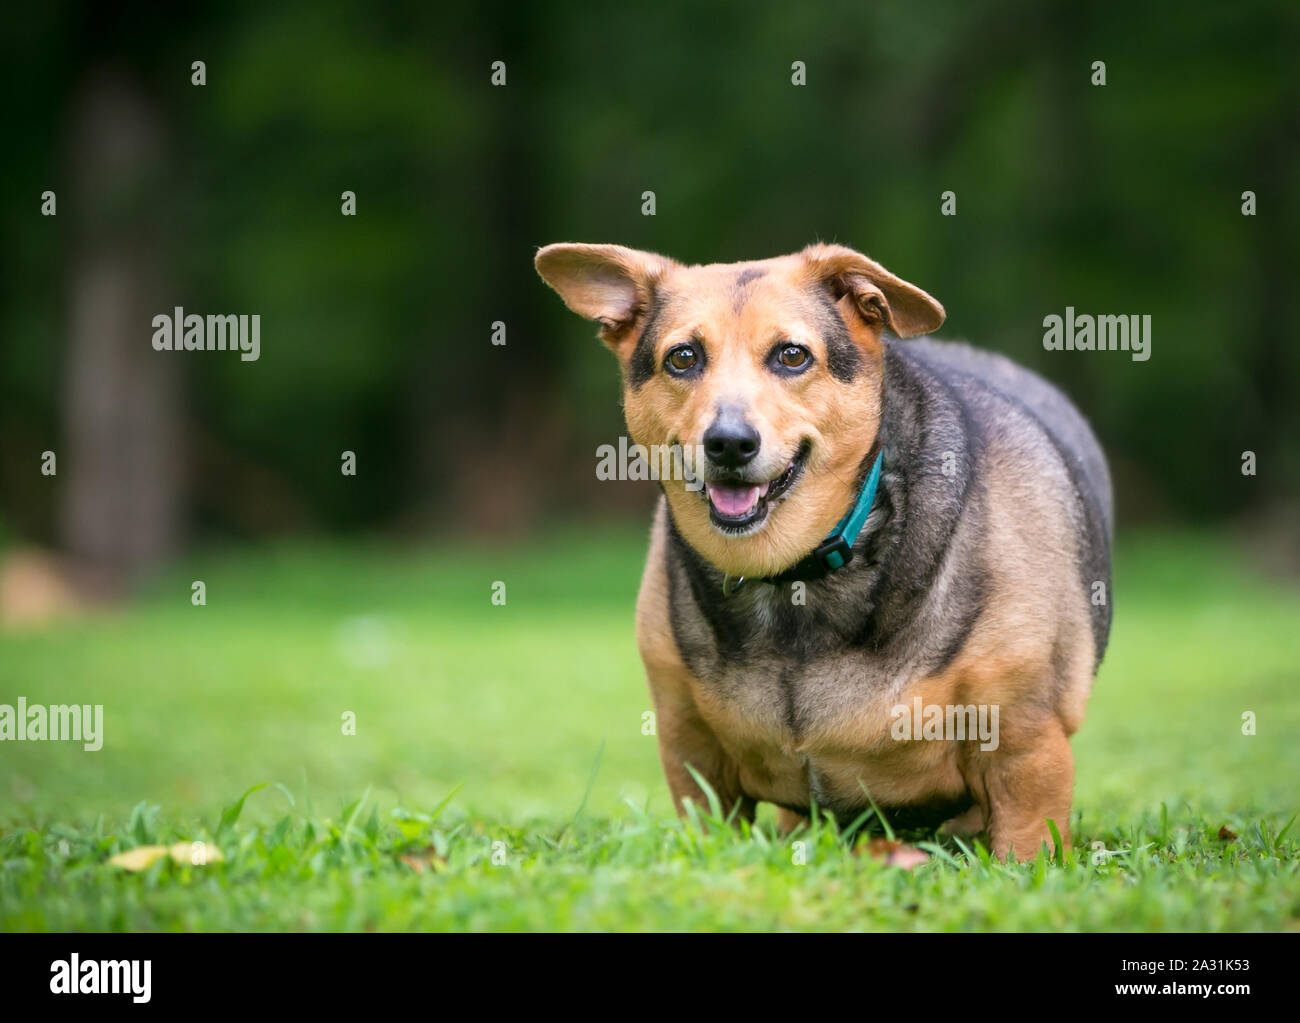 A severely overweight Welsh Corgi mixed breed dog with floppy ears standing outdoors Stock Photo